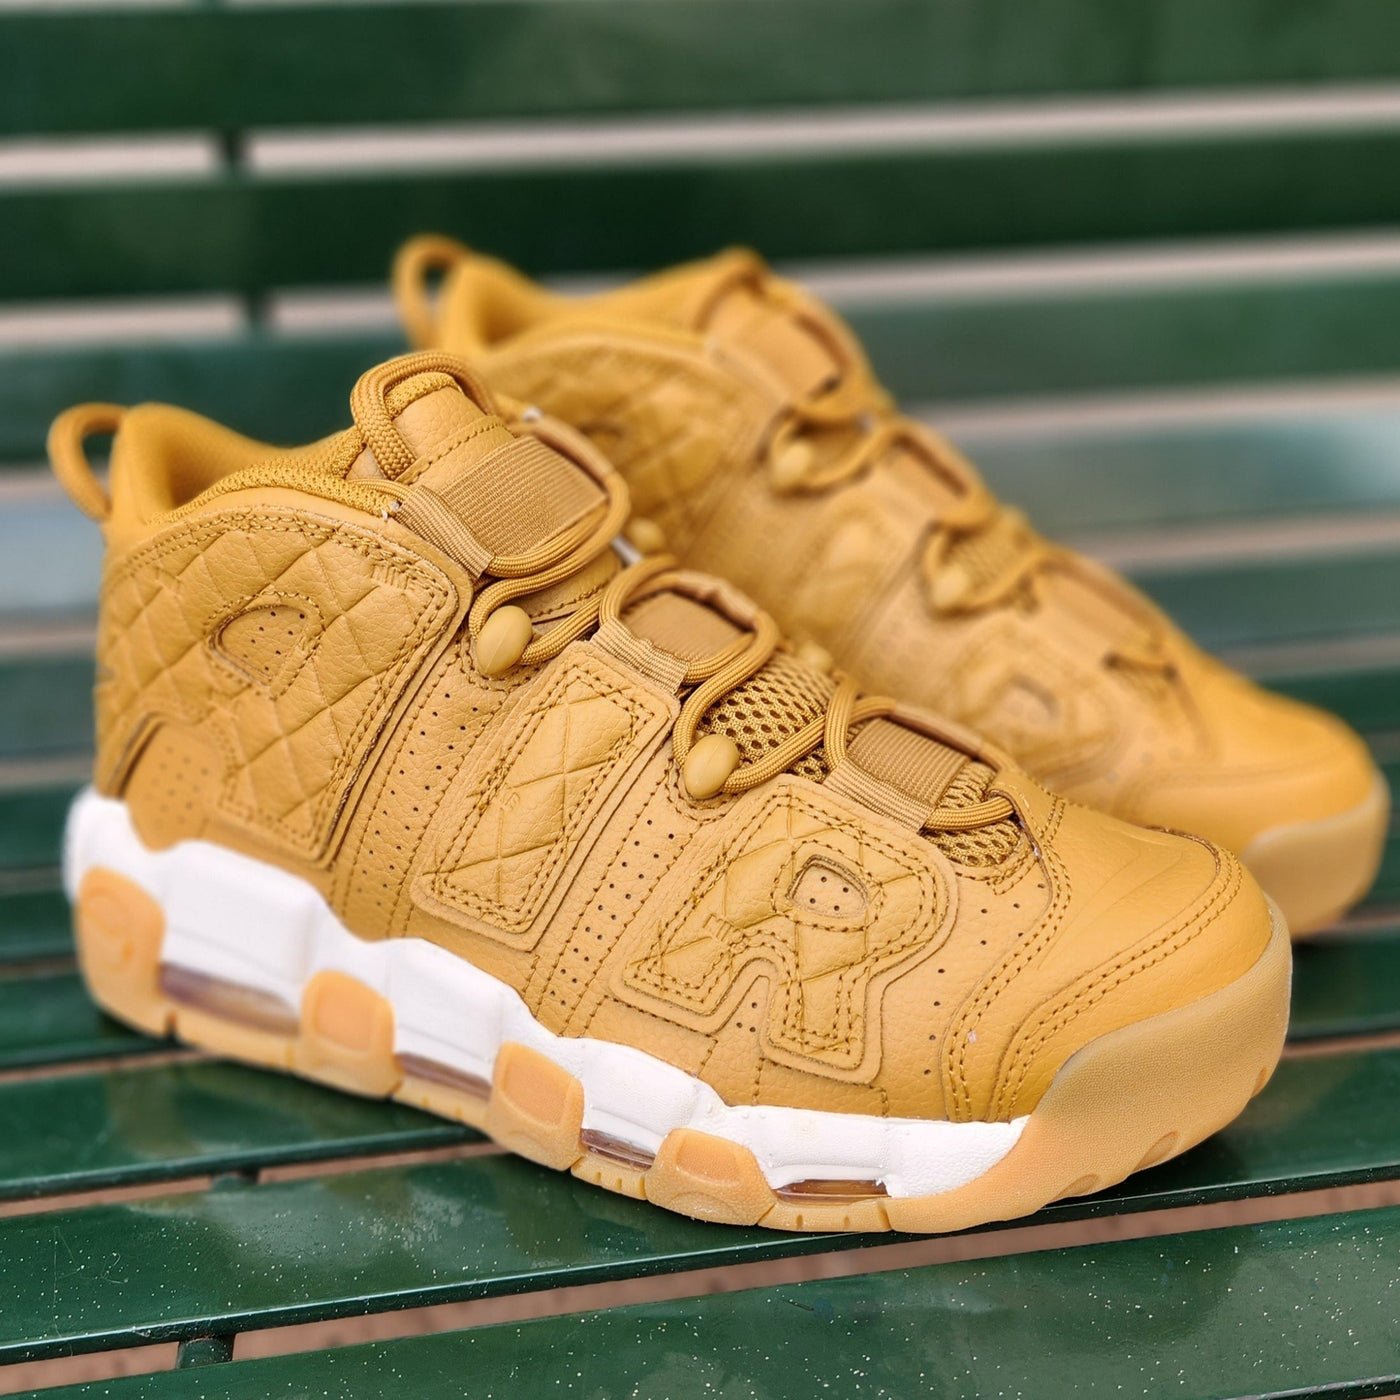 zebra wraak dictator On Sale: Women's Nike Air More Uptempo "Quilted Wheat" — Sneaker Shouts